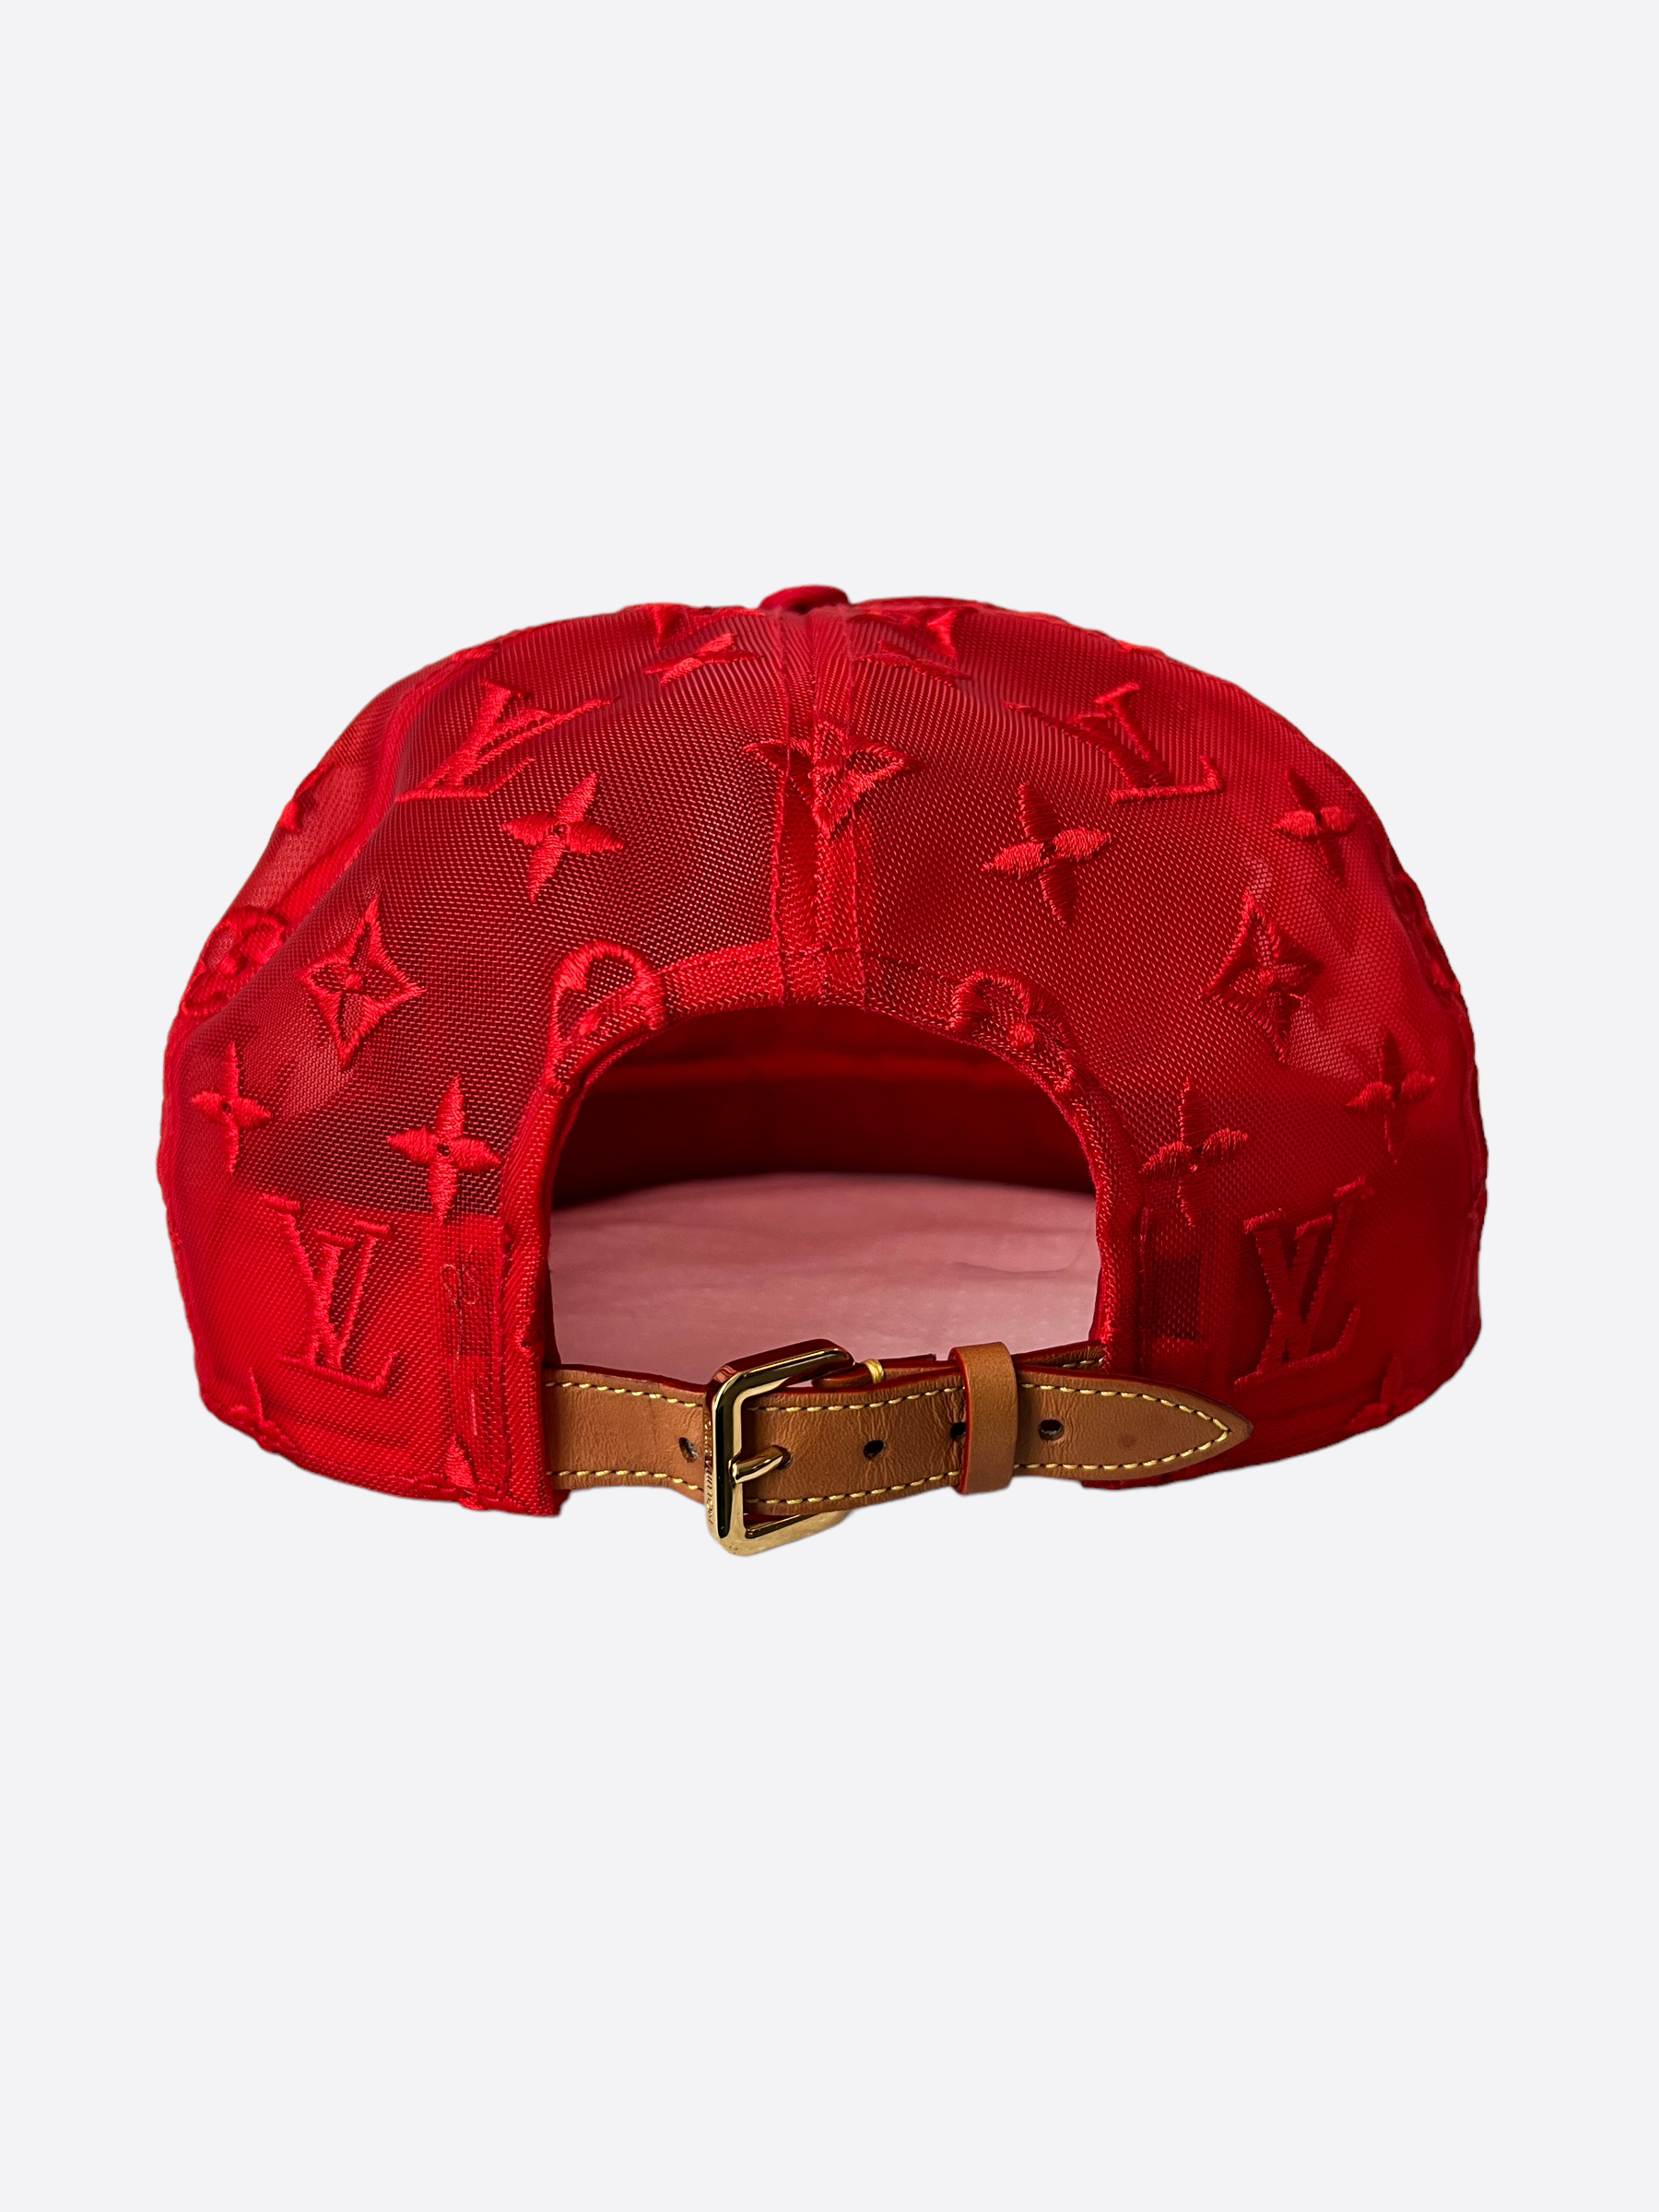 Louis Vuitton Everyday LV Embroidered Mesh Cap (Soho Exclusive) Red for Men